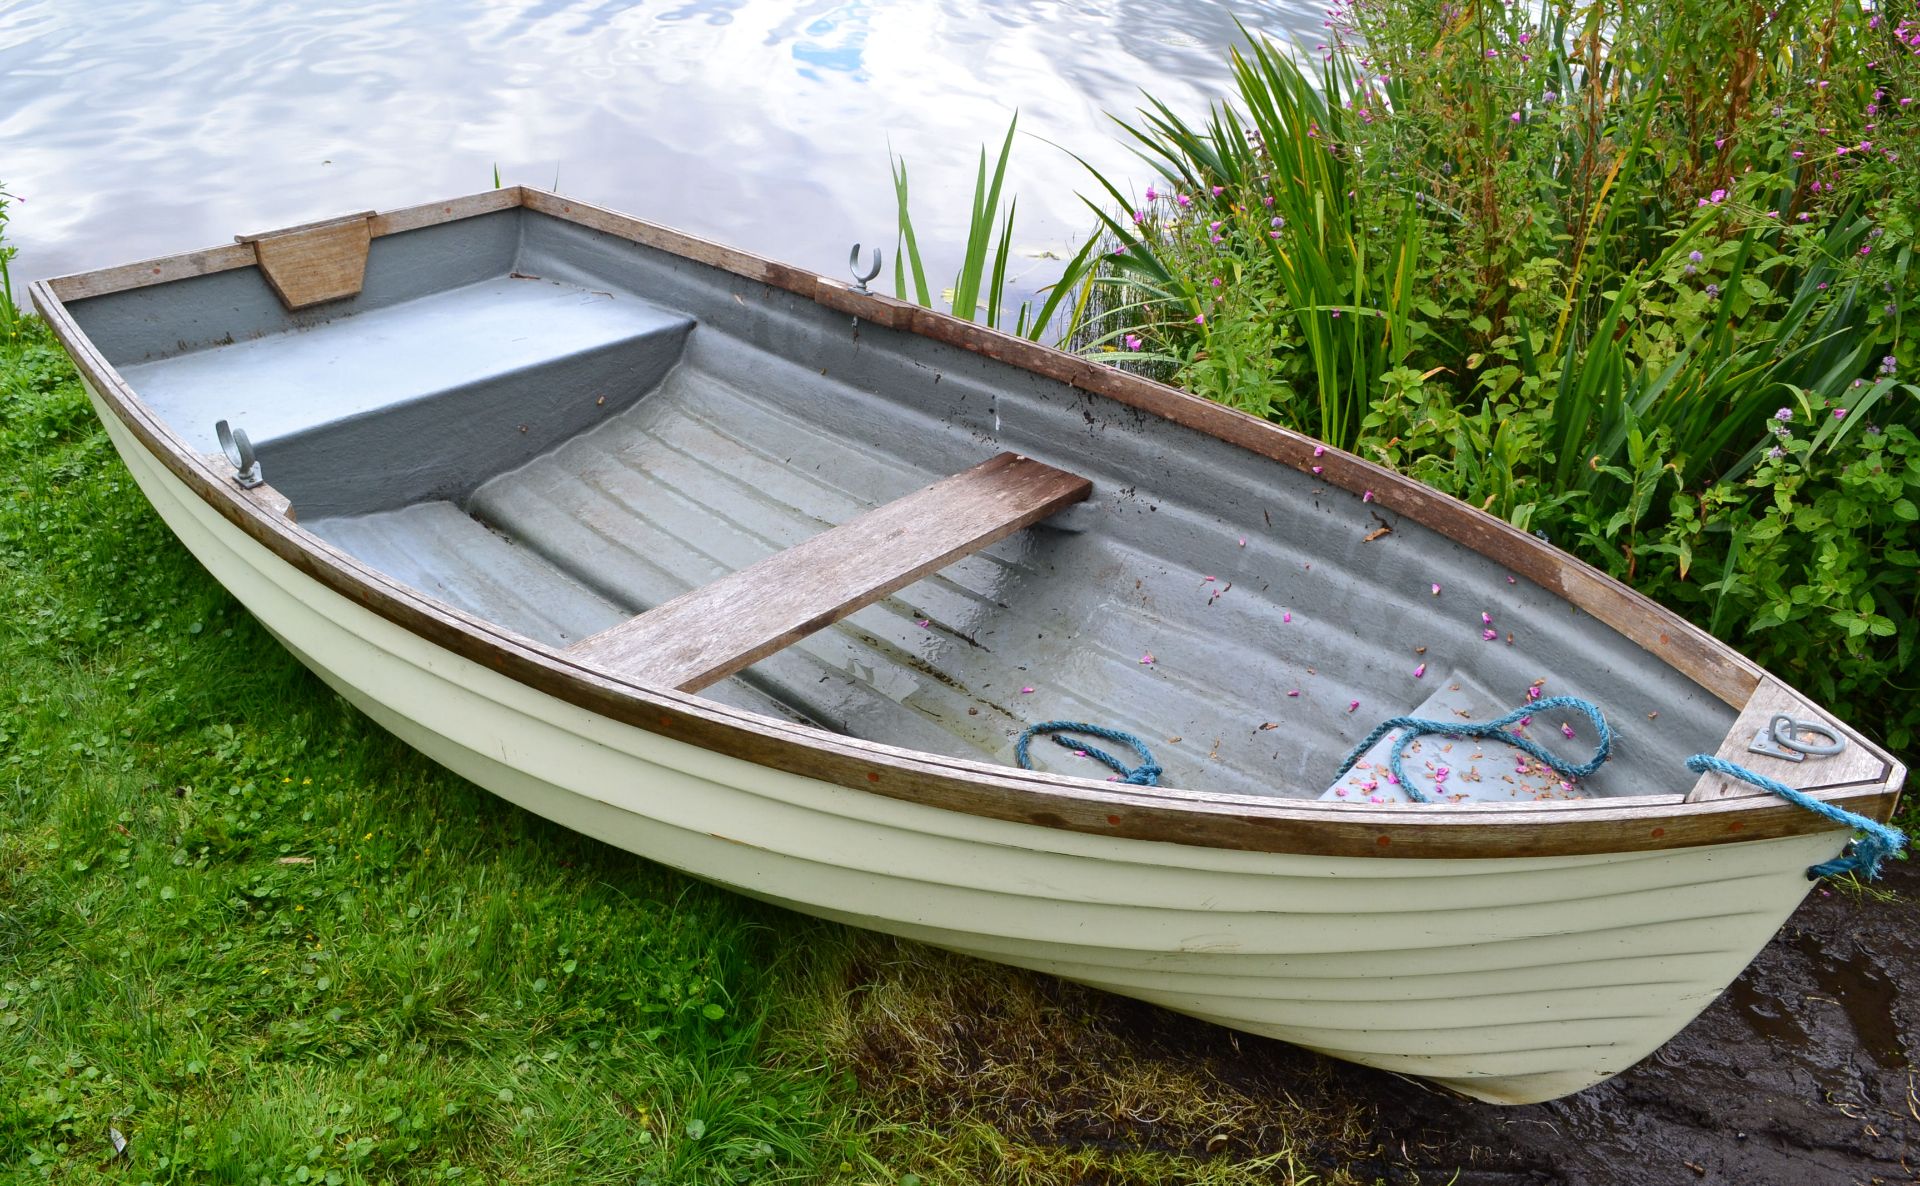 1 x Clovelly 290 Glass Fibre Rowing Boat - 240Kg Maximum Load - CL226 - Location: Knutsford WA16 - Image 10 of 15